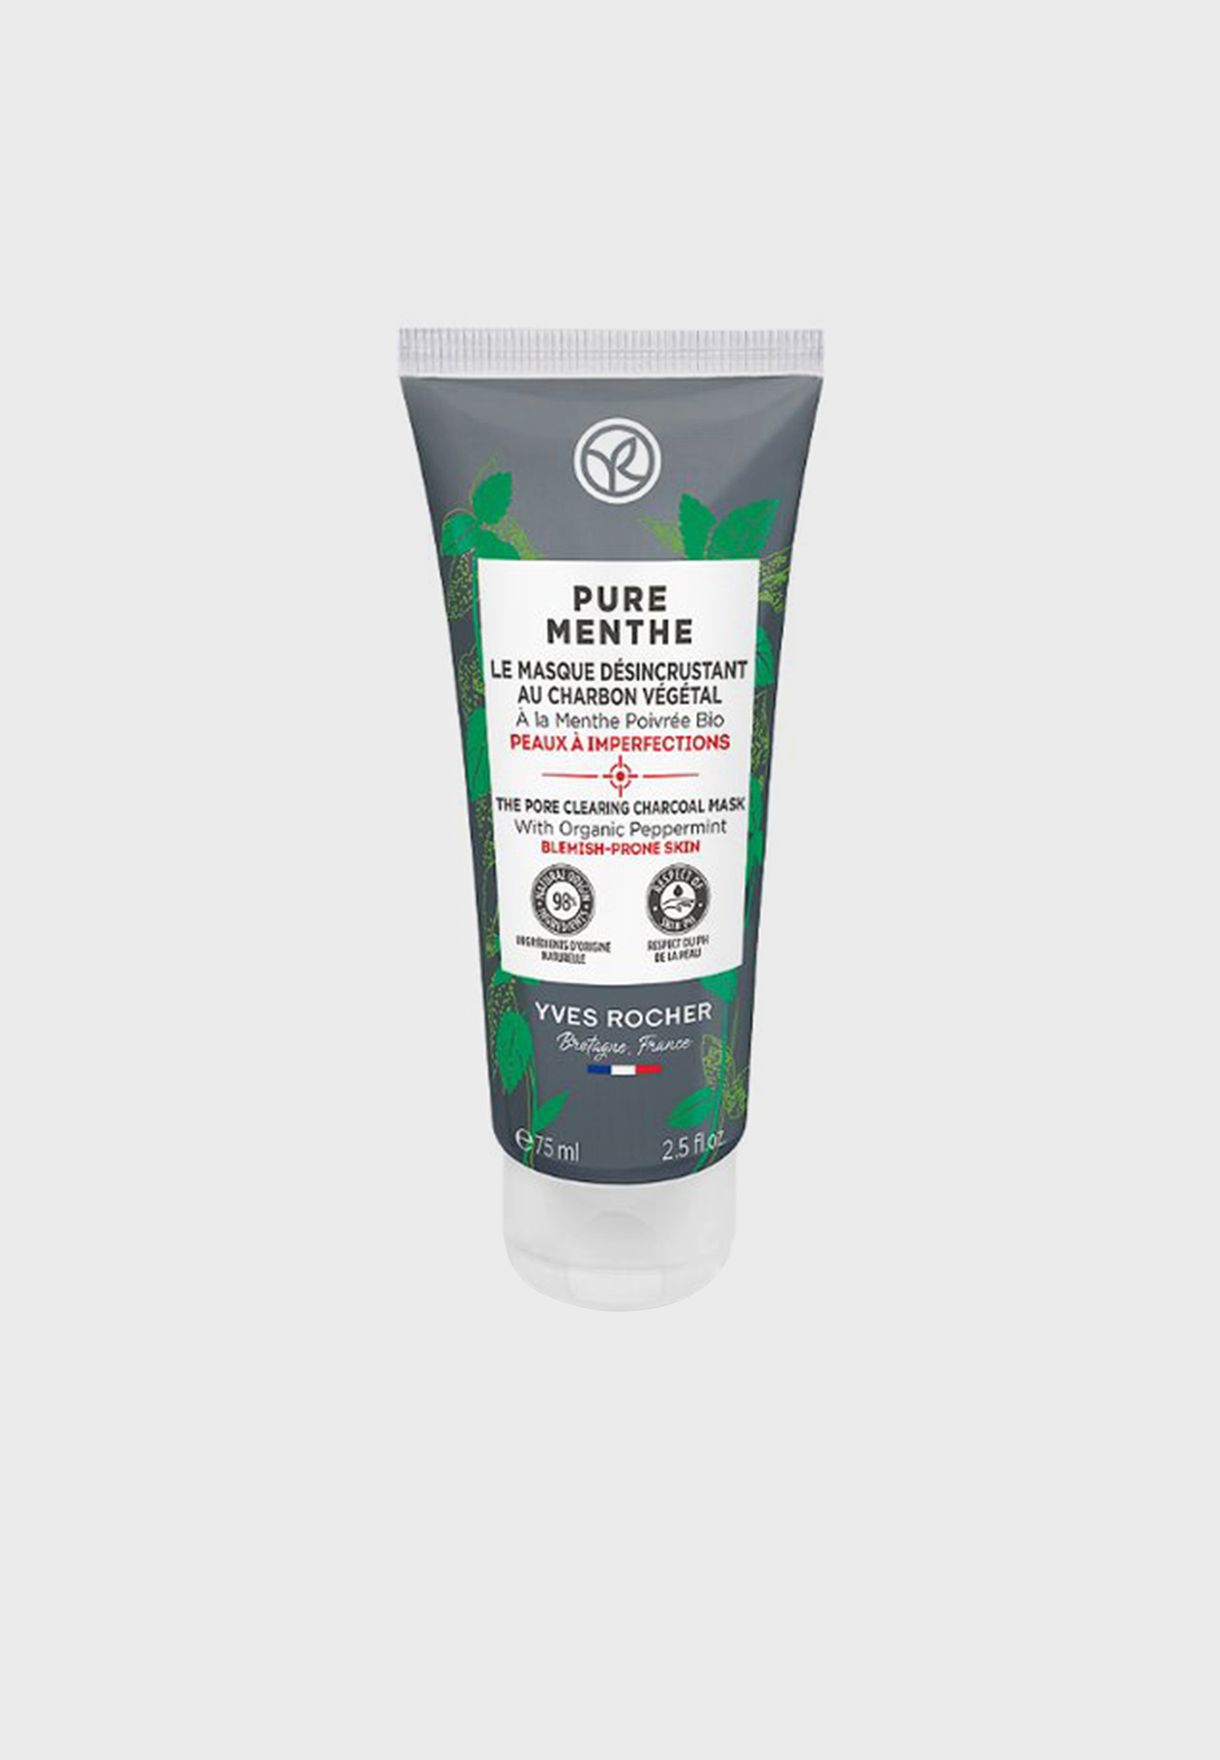 PURE MENTHE PORE CLEARING CHARCOAL MASK TUBE 75ML